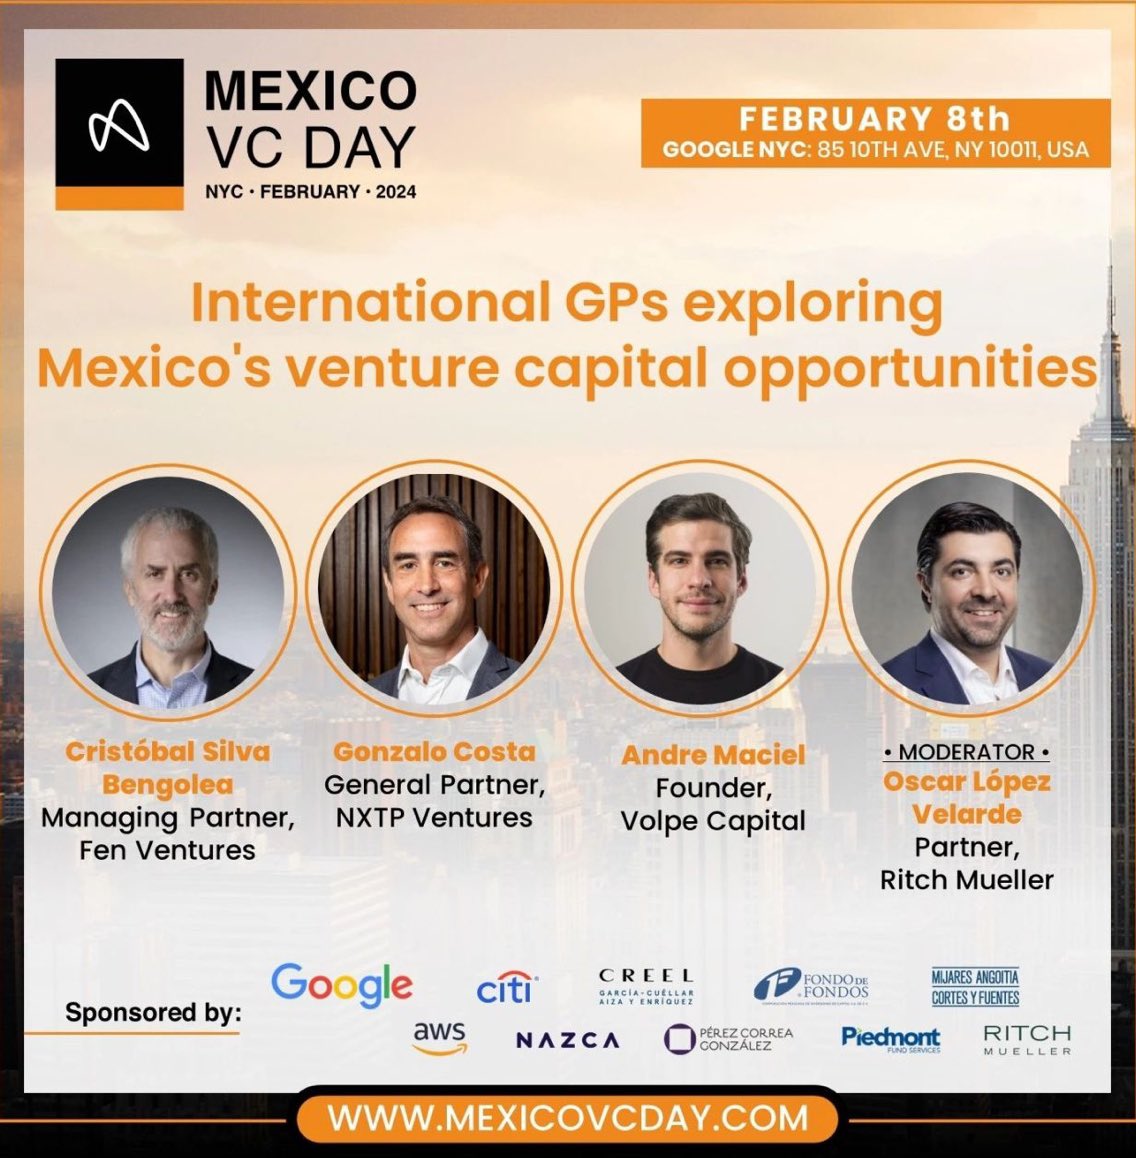 Thanks @AMEXCAP for an amazing event. It was great to connect with fellow VC and LPs and share the excitement about opportunities for founders building startups in Mexico. Viva 🇲🇽 !!!